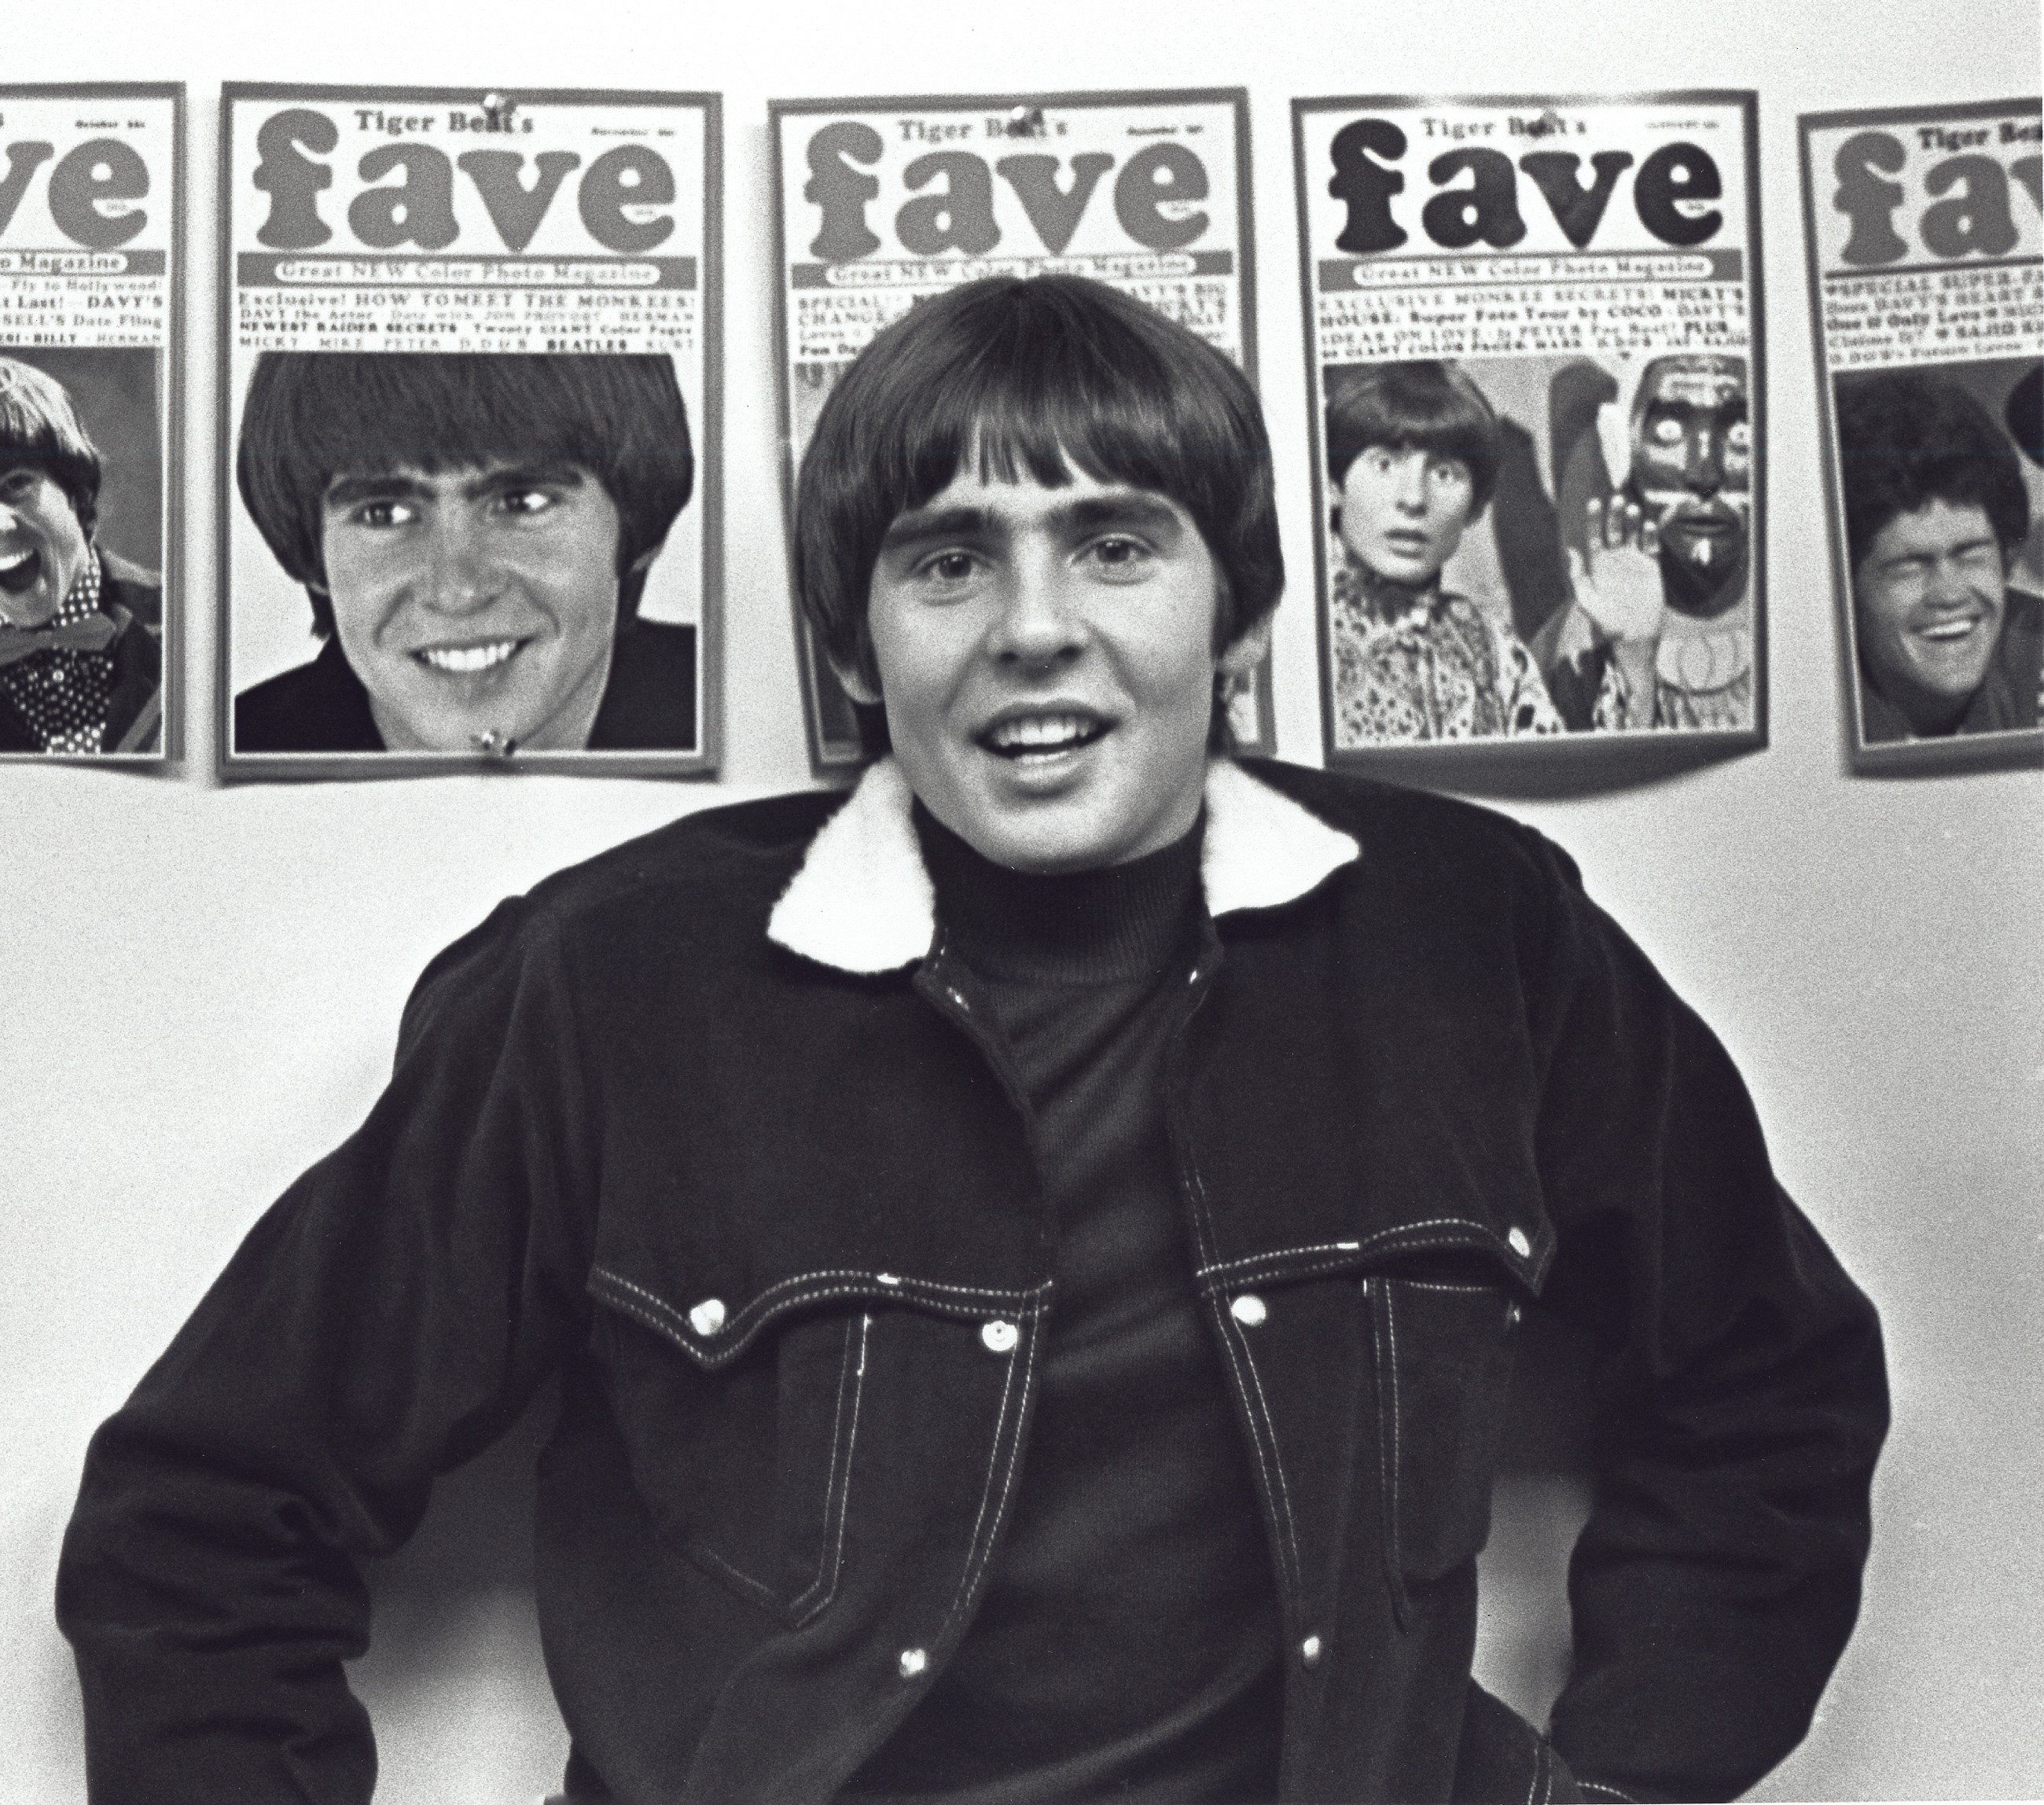 Davy Jones with posters during The Monkees'"Last Train to Clarksville" era